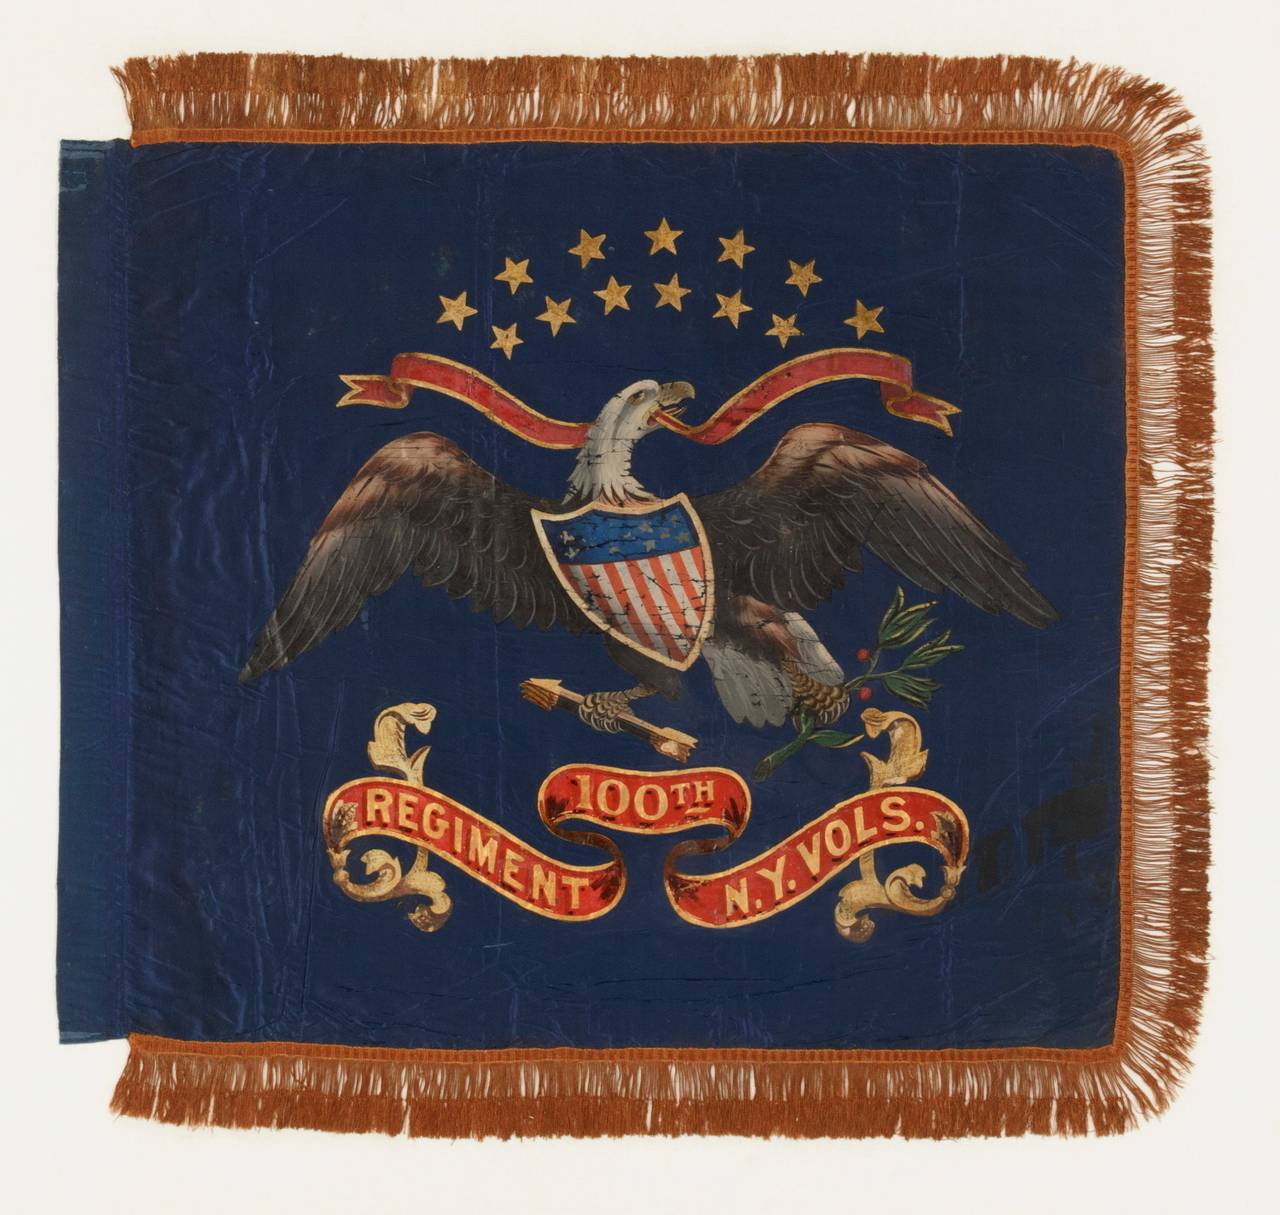 Rare Civil War Period Federal Standard Style Flank Guidon Of The 100th New York Volunteer Infantry, Hand-painted And Gilded On Silk, 1862-1865:

During the Civil War, U.S. Army regulations set forth that an infantry unit would carry two flags.